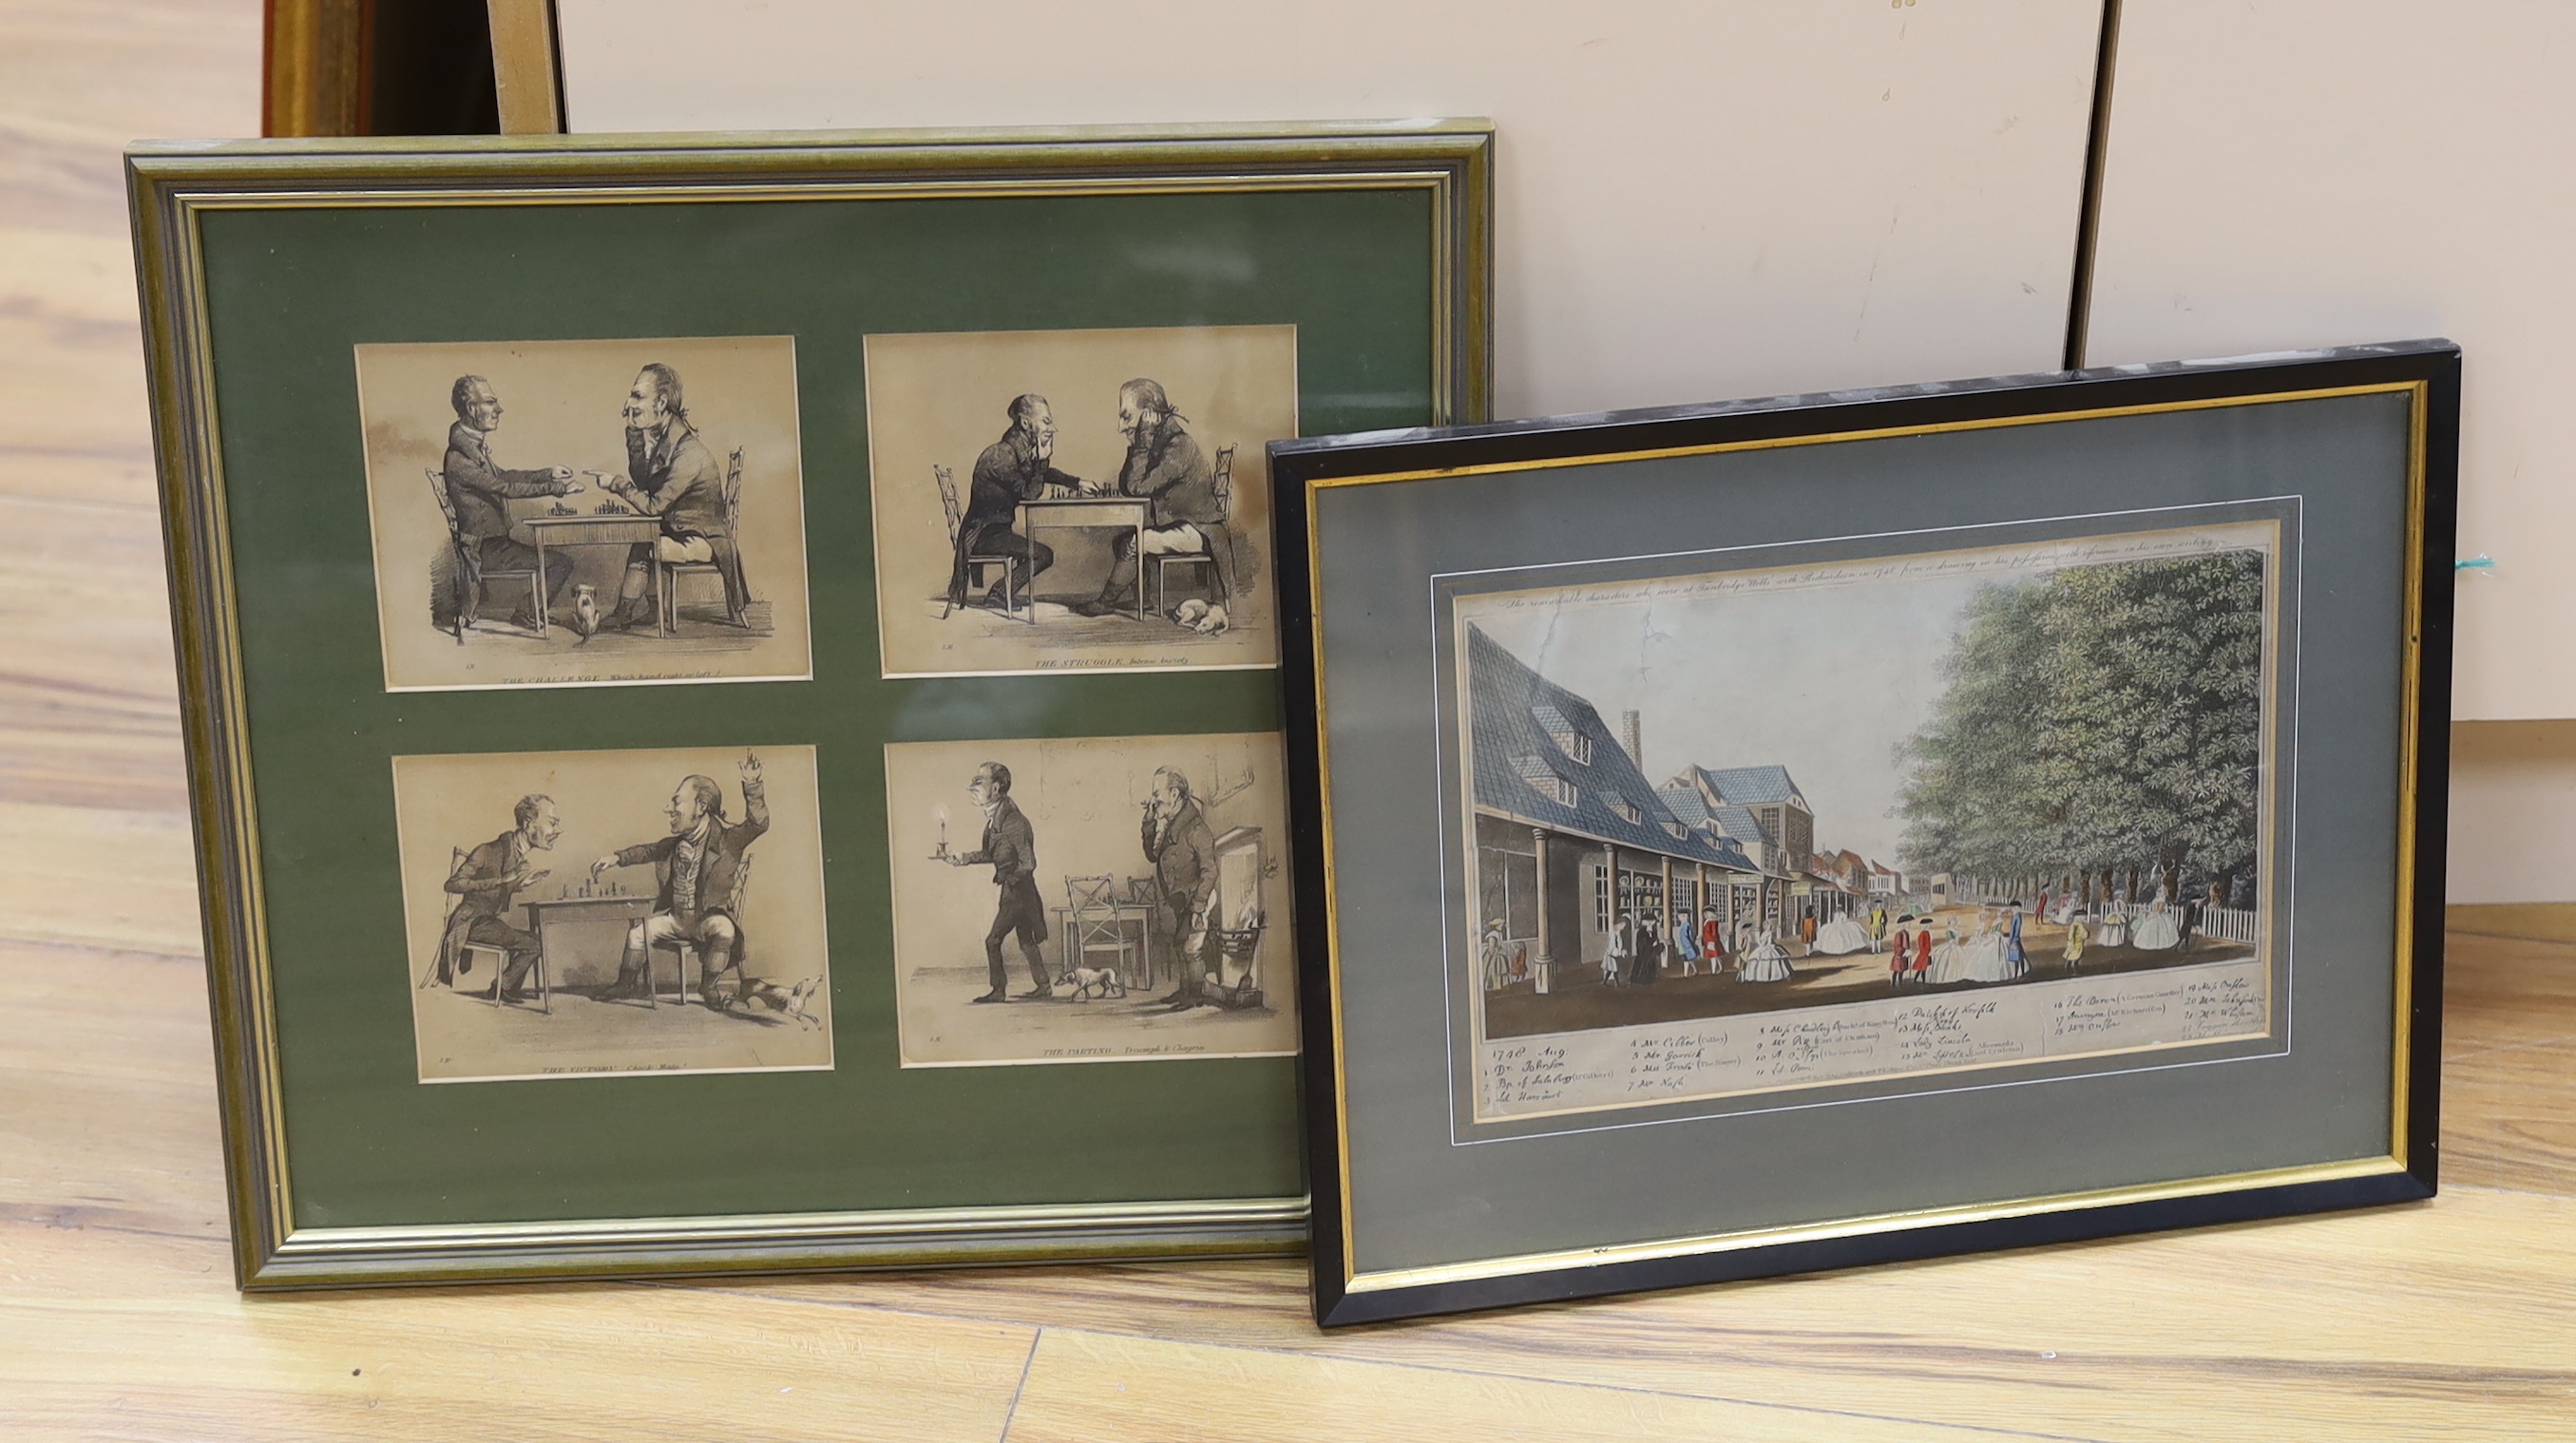 Two 19th century prints, Mr Loggan, 'The remarkable characters who were at Tunbridge Wells with Richardson in 1748', publ. 20th May 1804 for Richard Phillips and a print of Chess players, largest 18 x 28cm